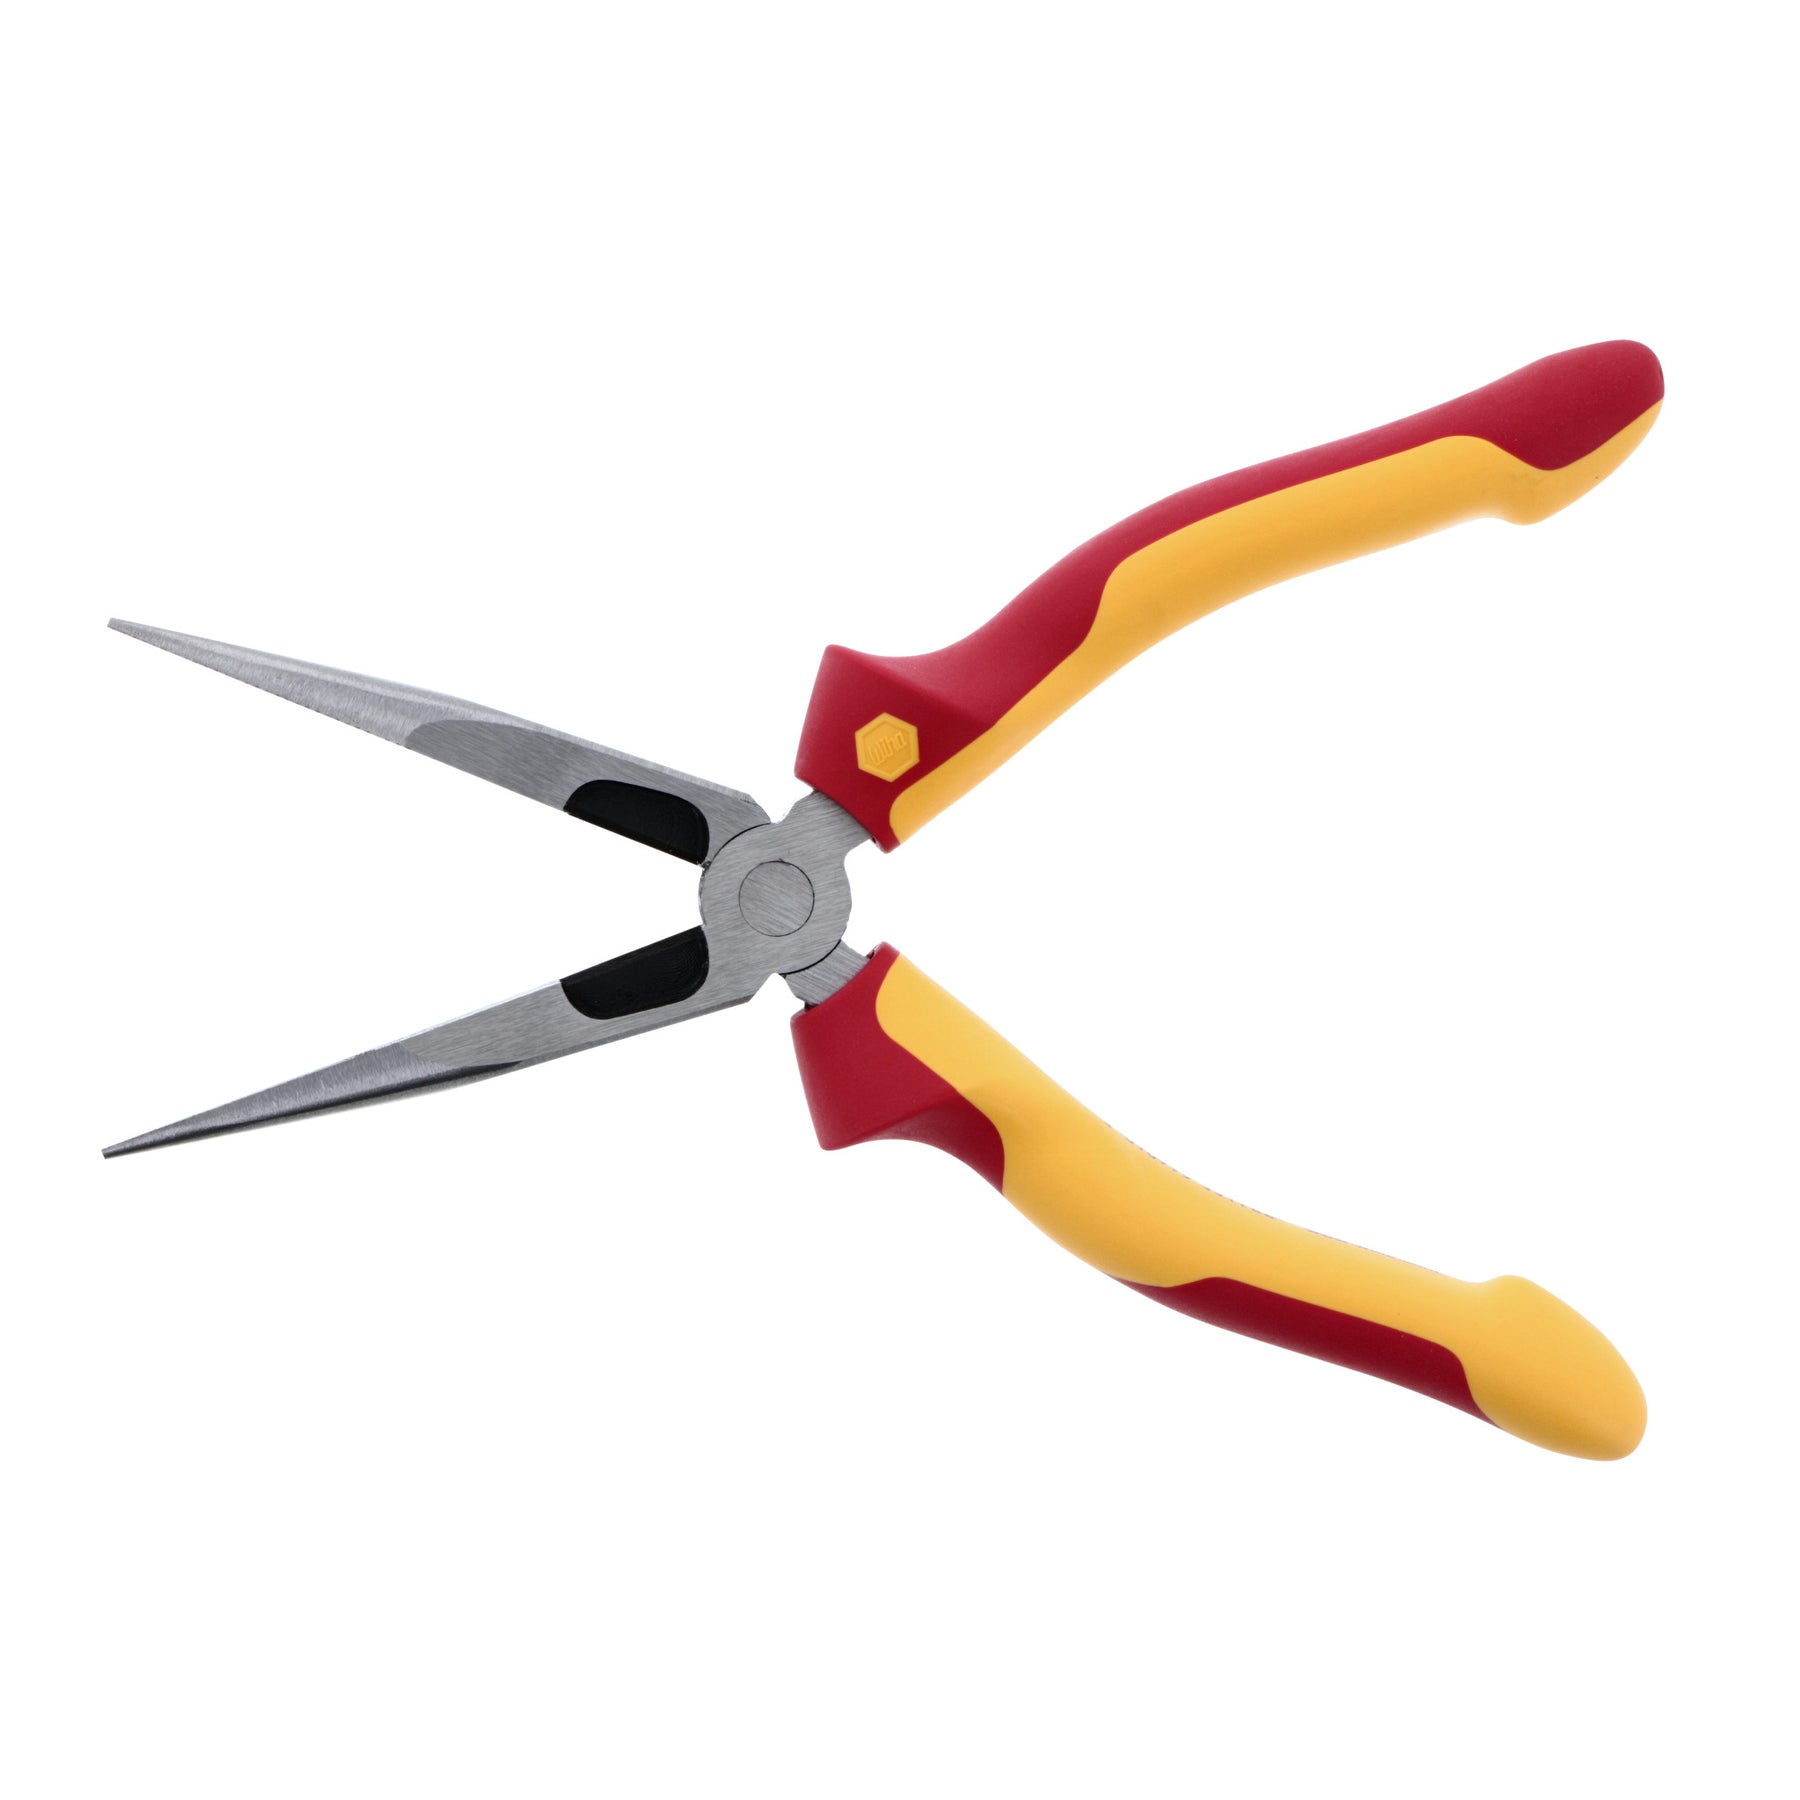 Insulated Needle Nose Pliers, 8” Long Nose Insulated Pliers